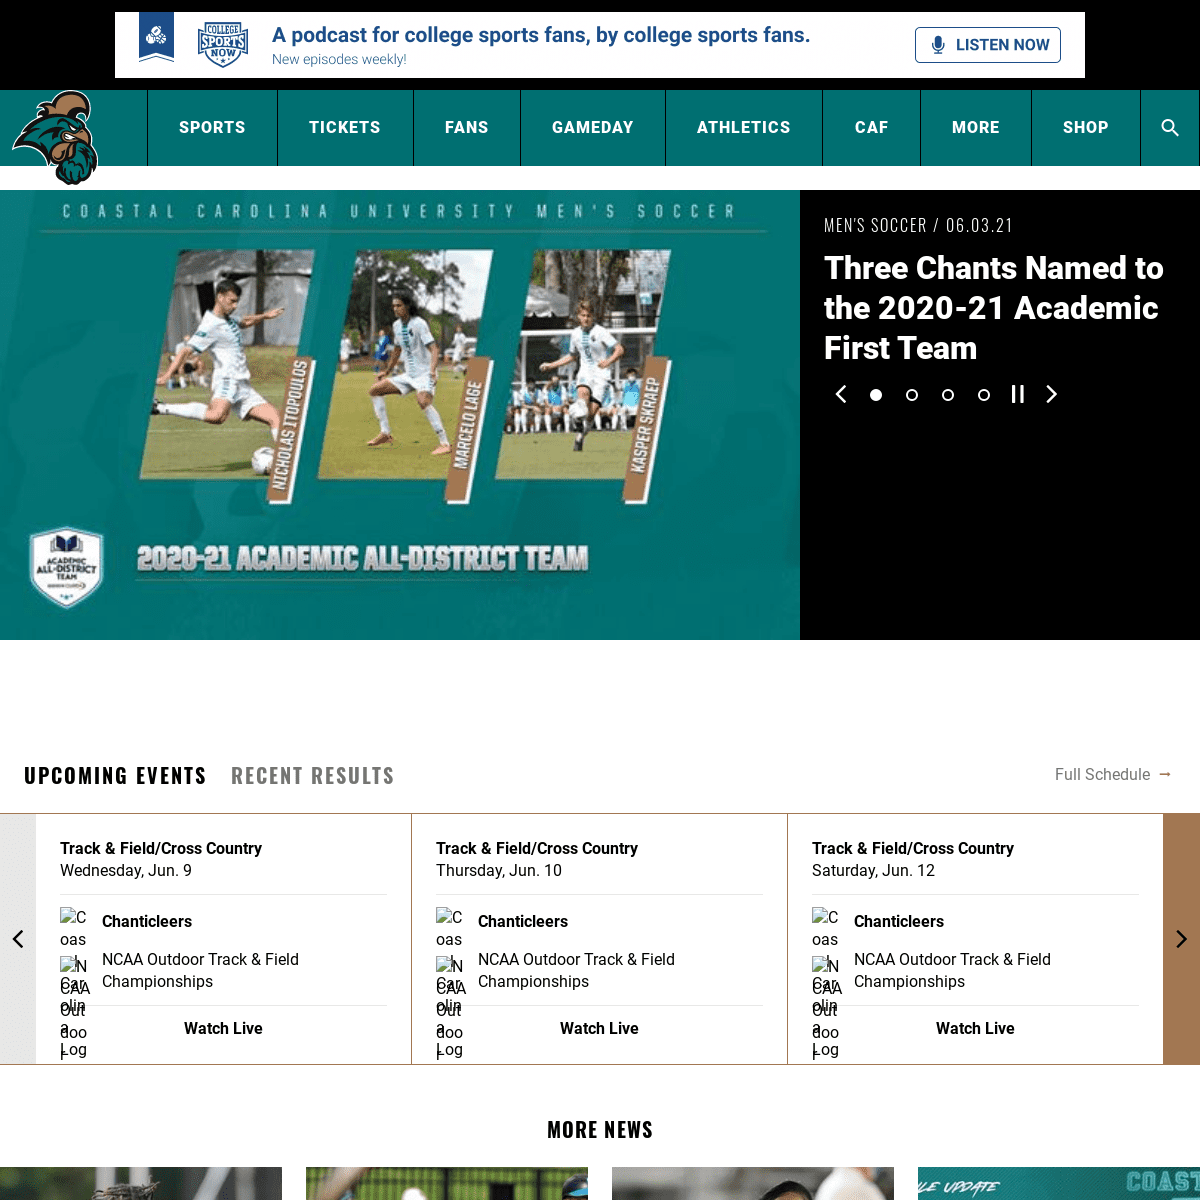 A complete backup of https://goccusports.com